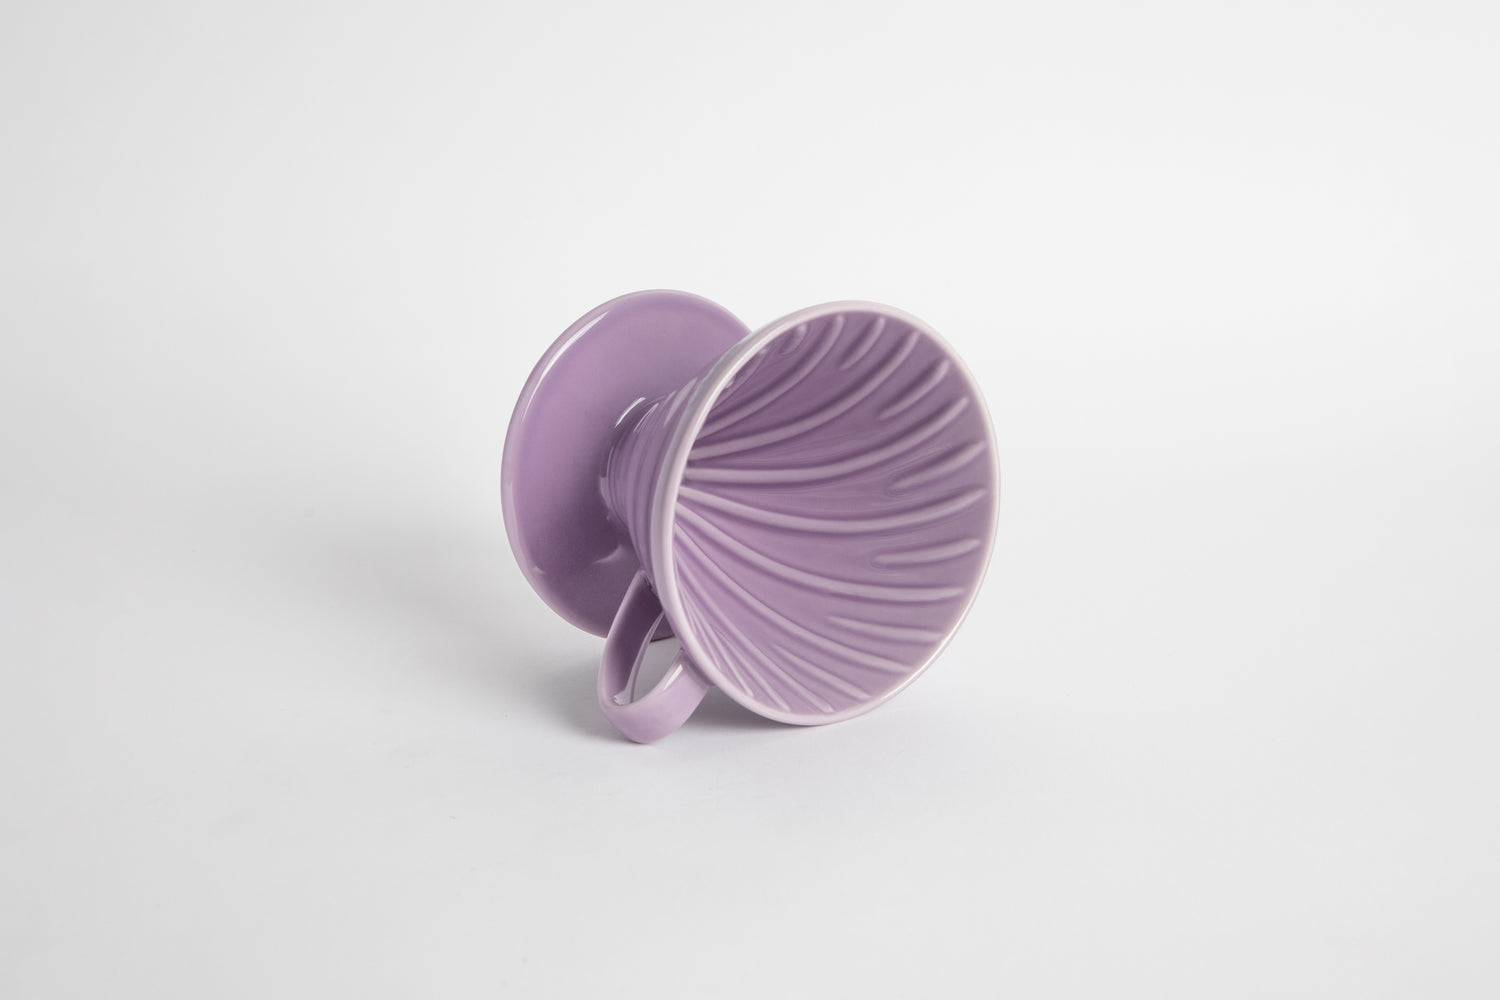 Purple Heather 60 degree cone shaped ceramic coffee dripper with handle and round base. Spiral ribbed on the inside cone. Set on white background